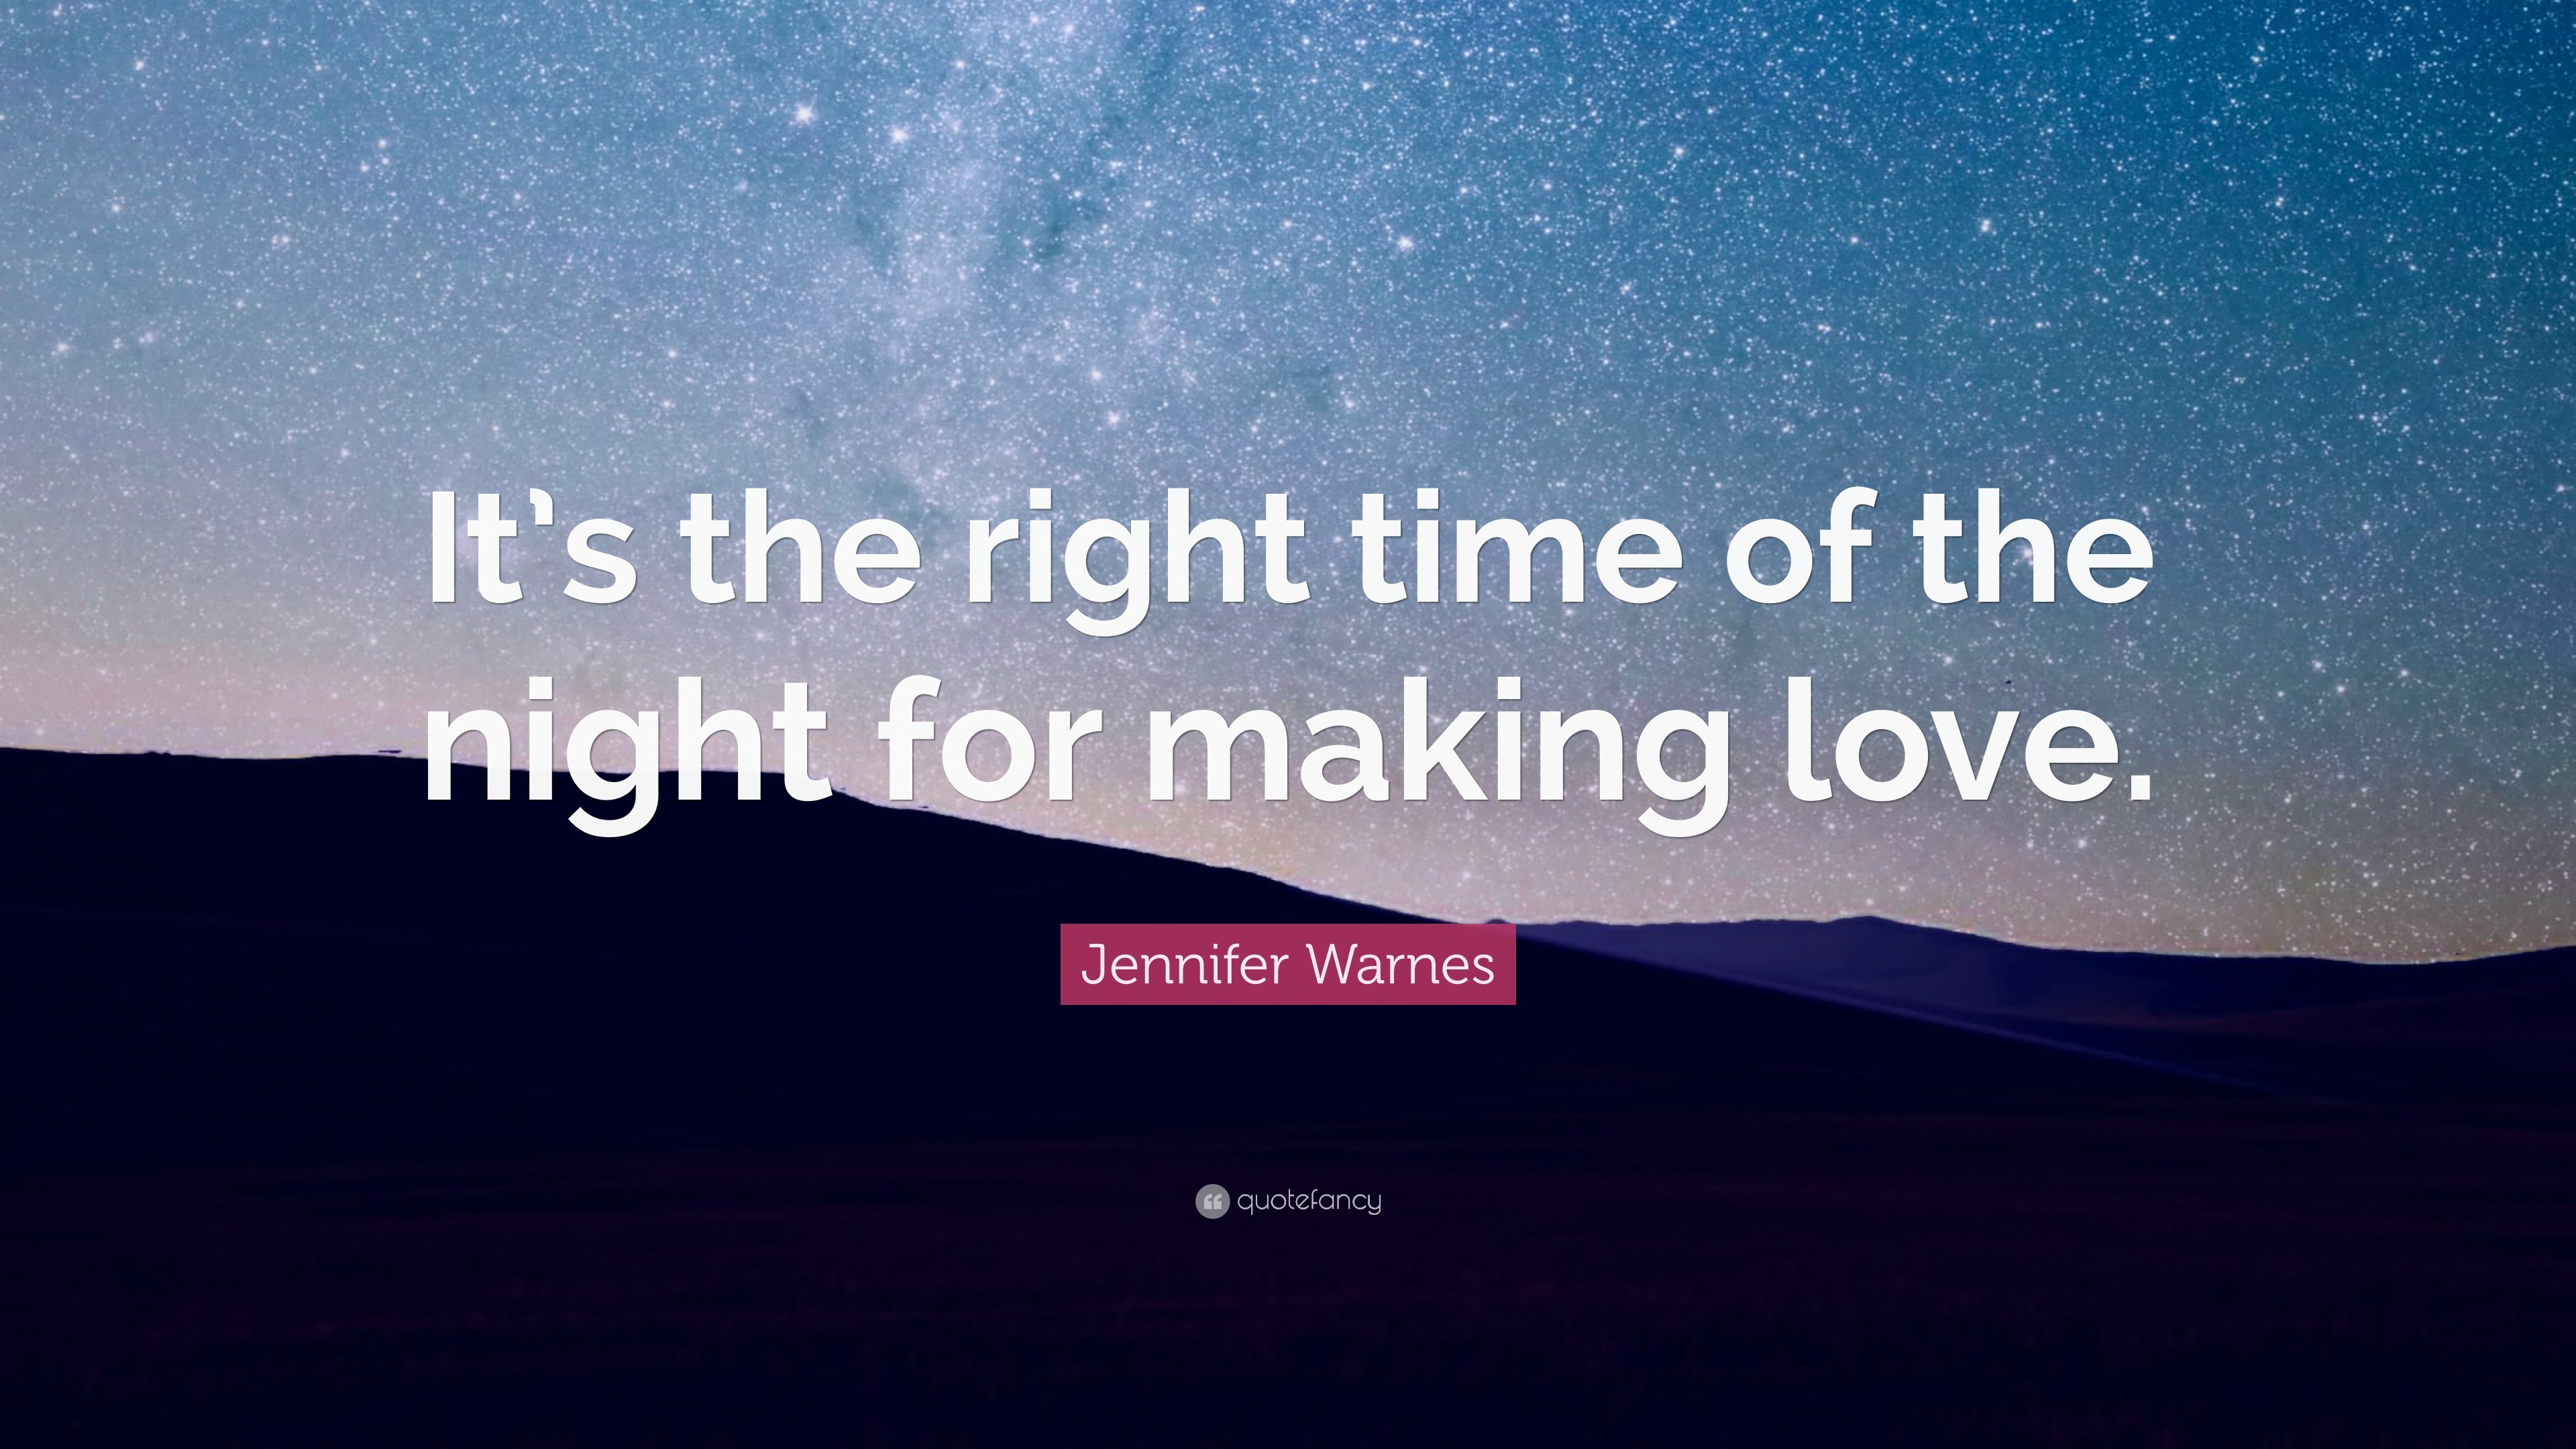 Jennifer Warnes Quote “It s the right time of the night for making love